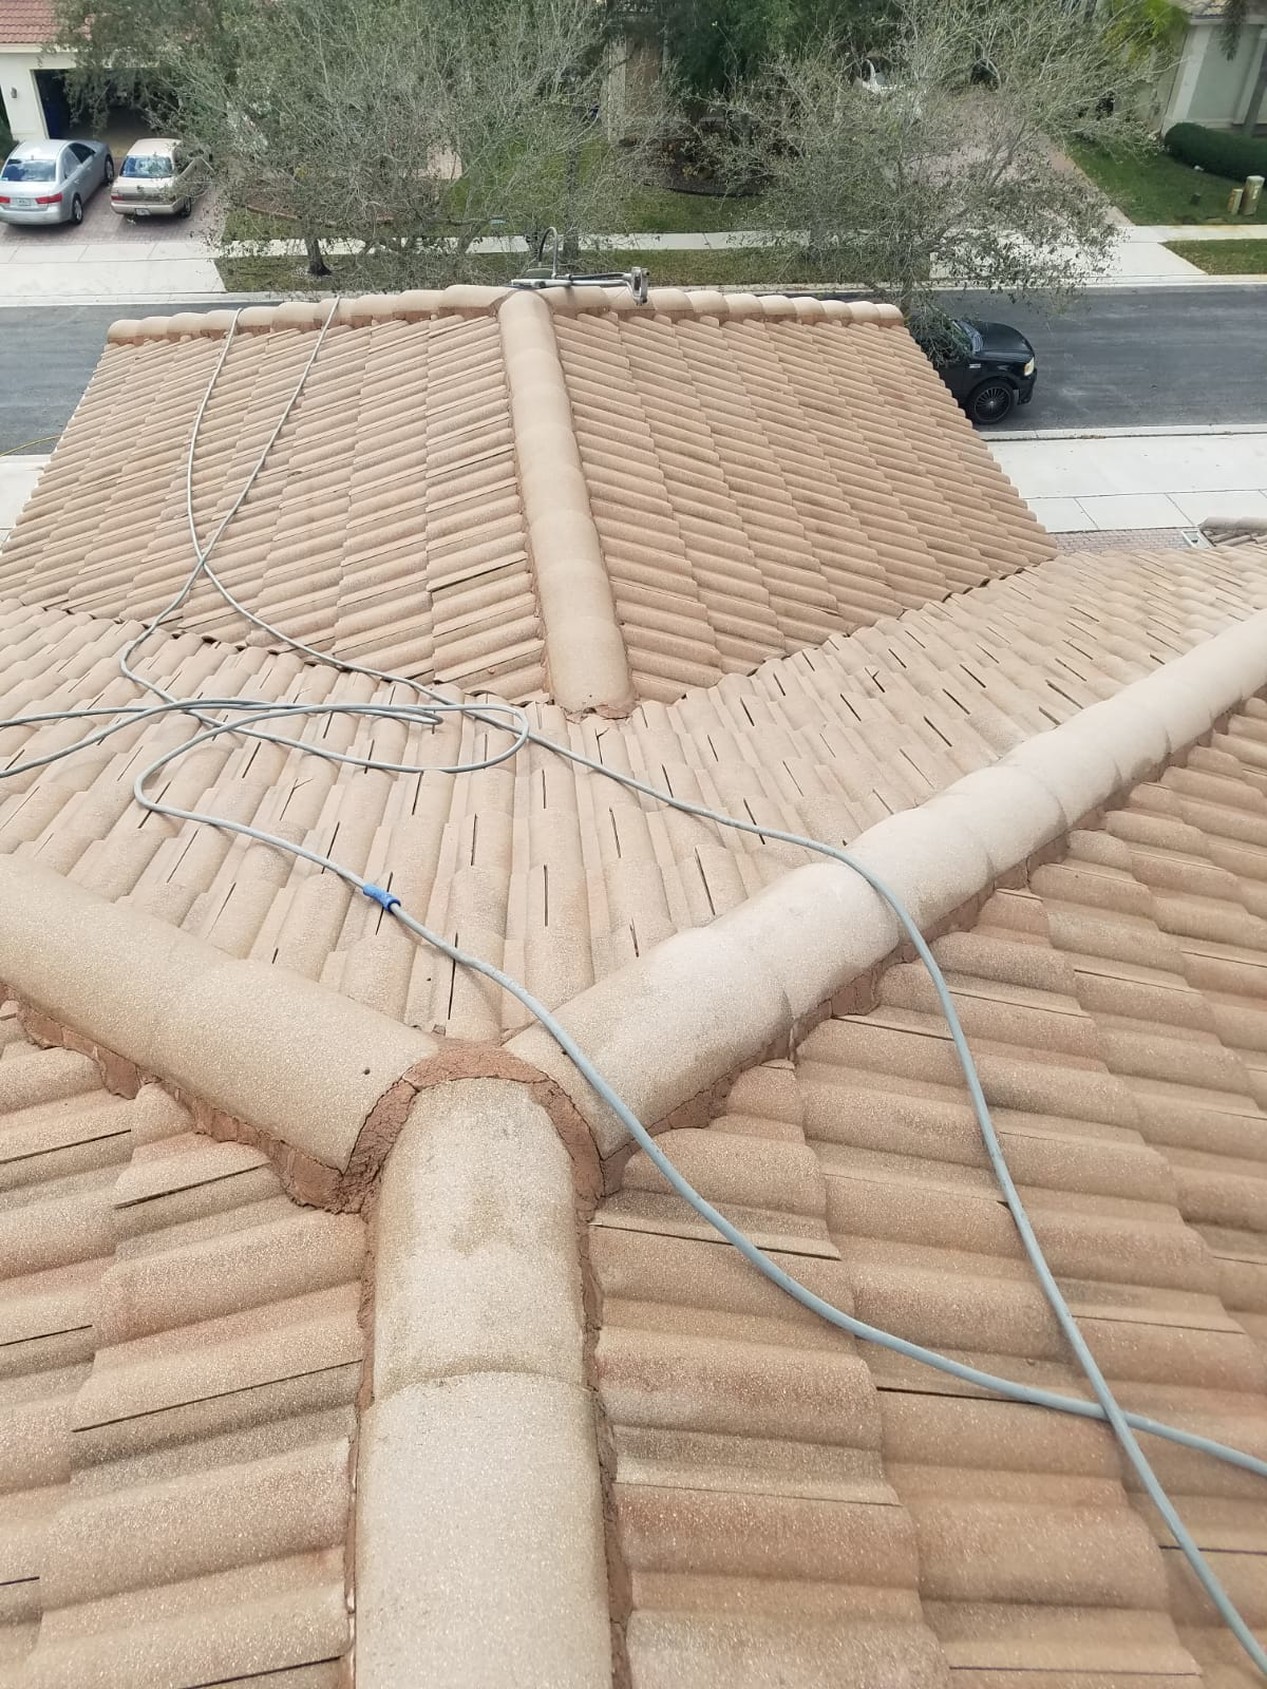 Pressure Cleaning Of Roof